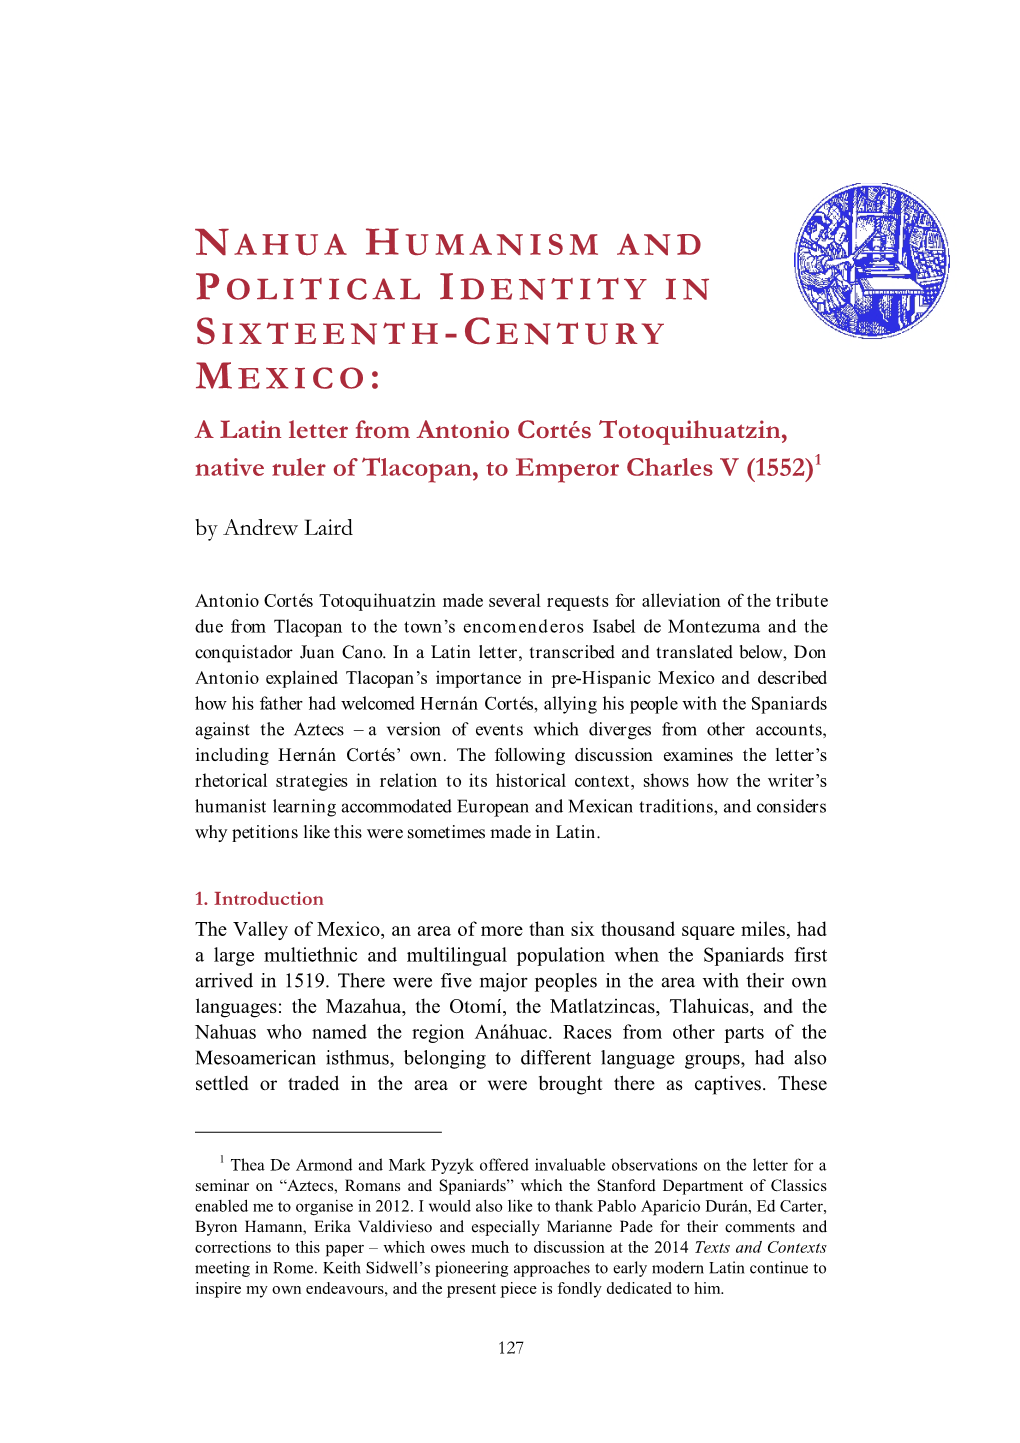 Nahua Humanism and Political Identity in Sixteenth